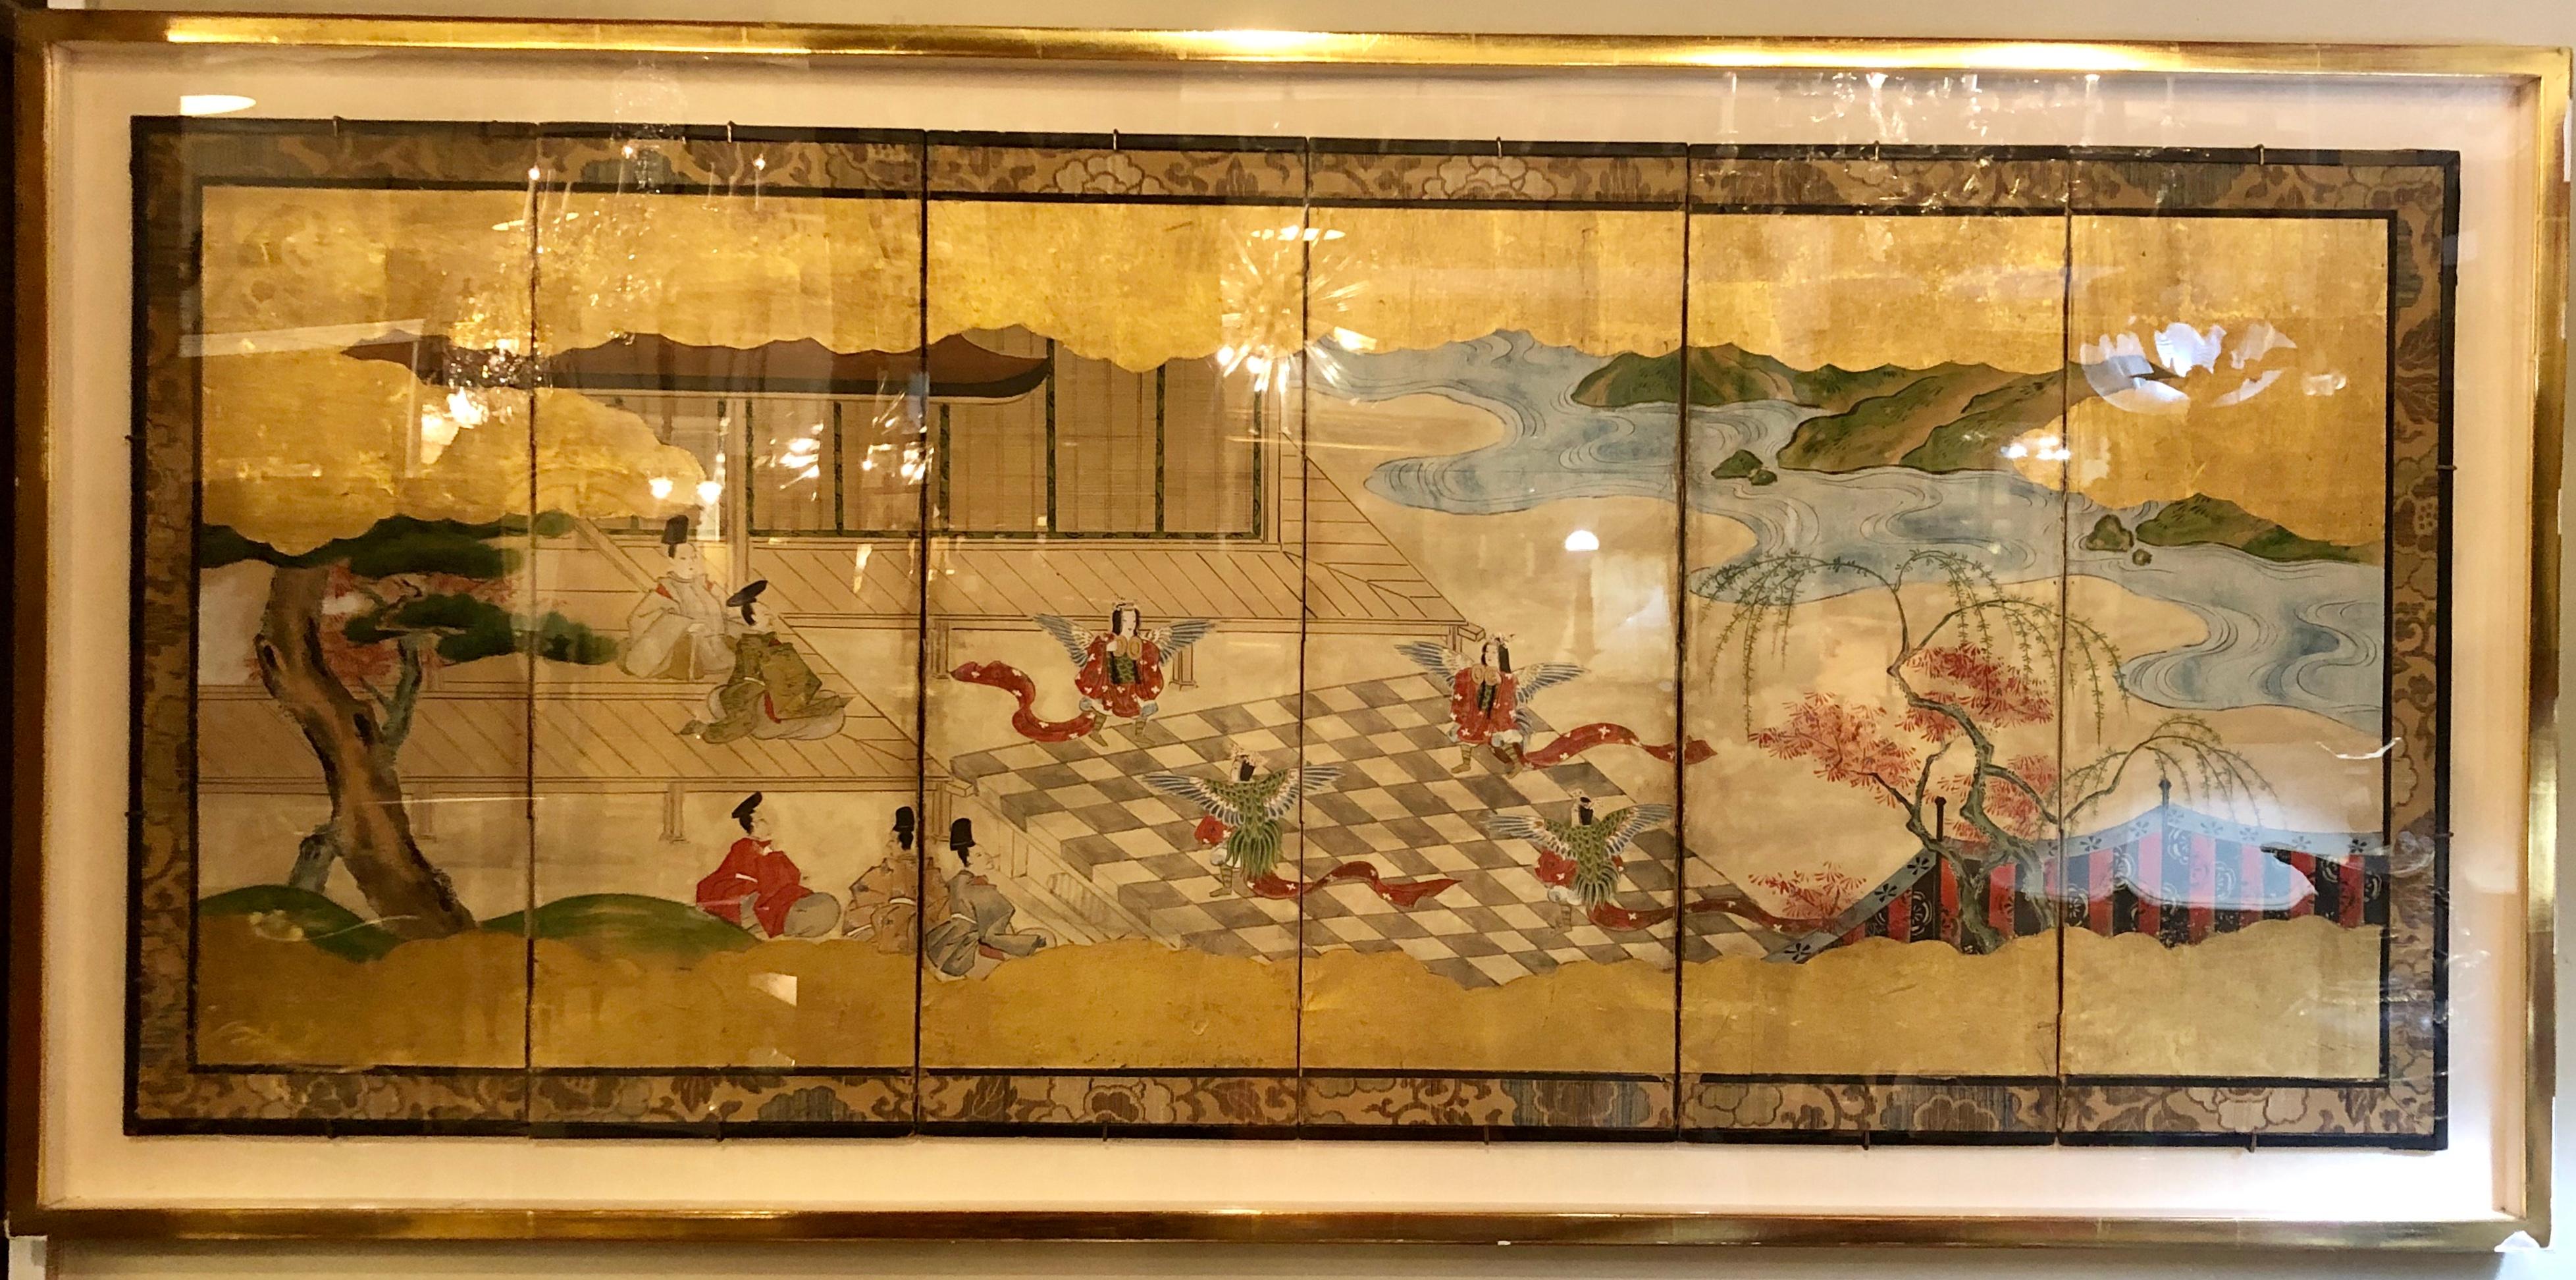 Japanese brilliant silk gilt screen six-panel under glass, superior details abound in this one of a kind silk screen having six panels telling a story as elders sit and watch winged female dancers in the garden. The whole under glass in a finely